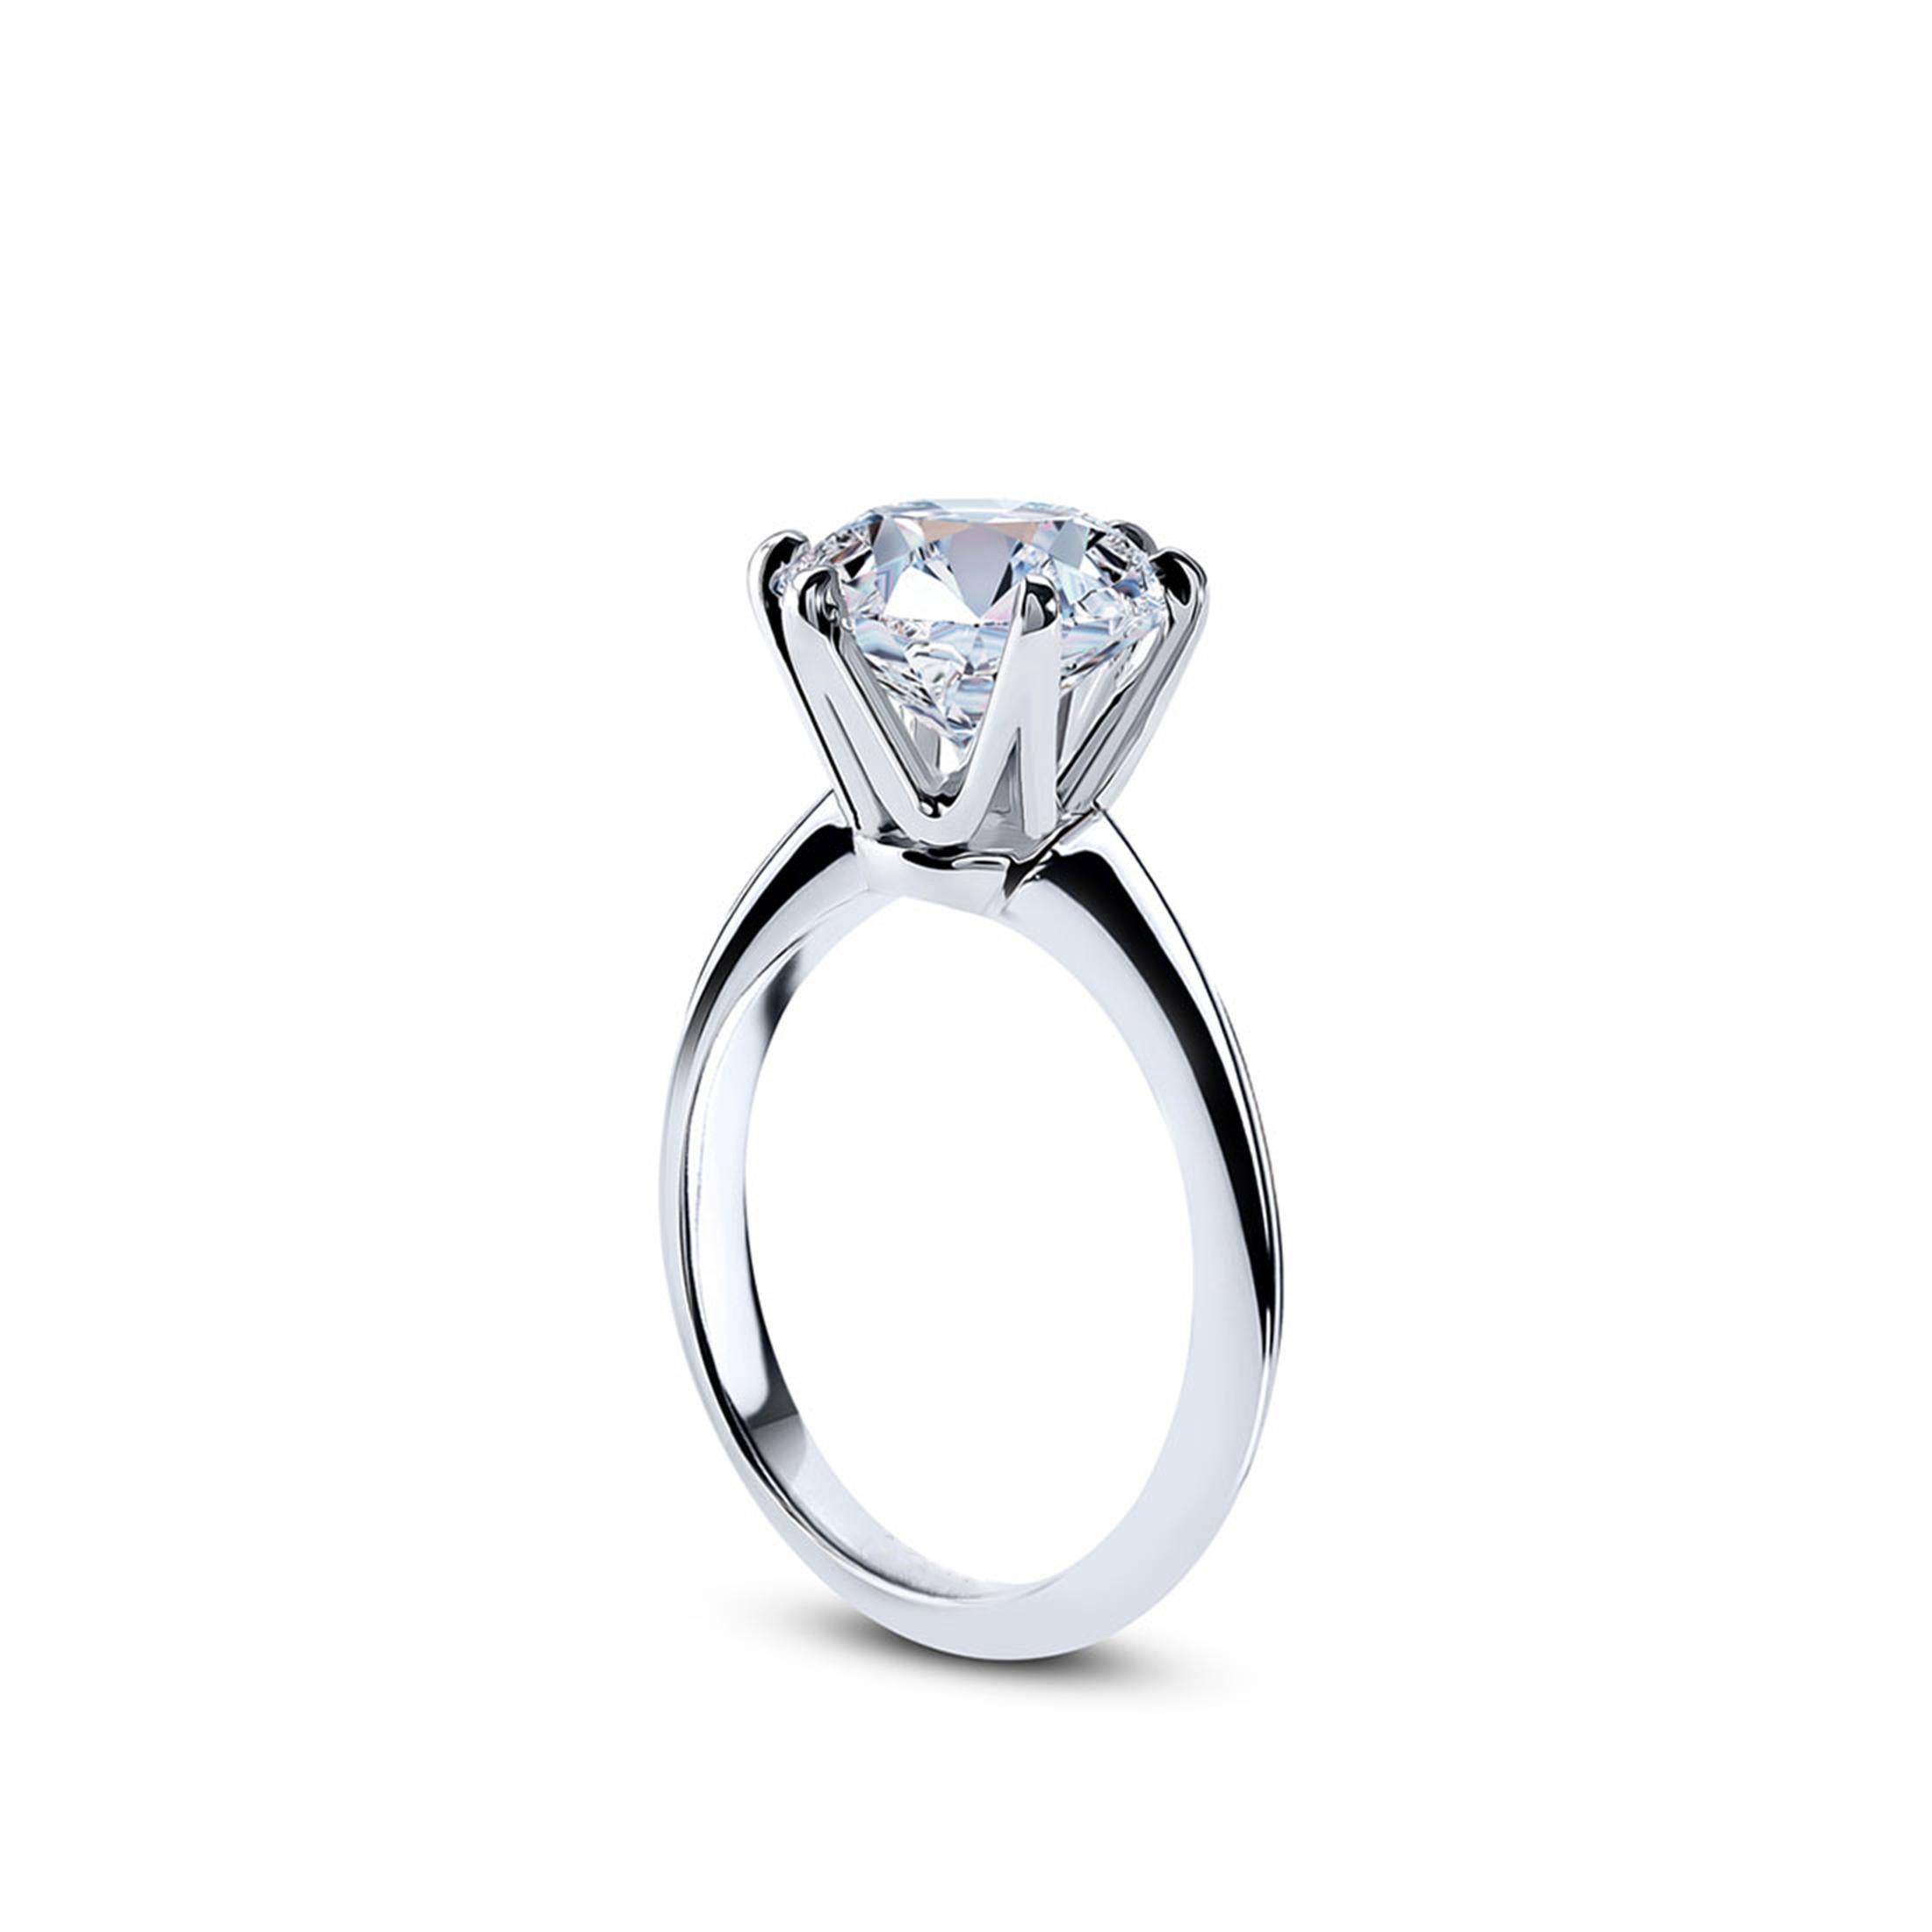 For Sale:  3 Carat Diamond Engagement Ring in 18K White Gold, Certified G Color 2